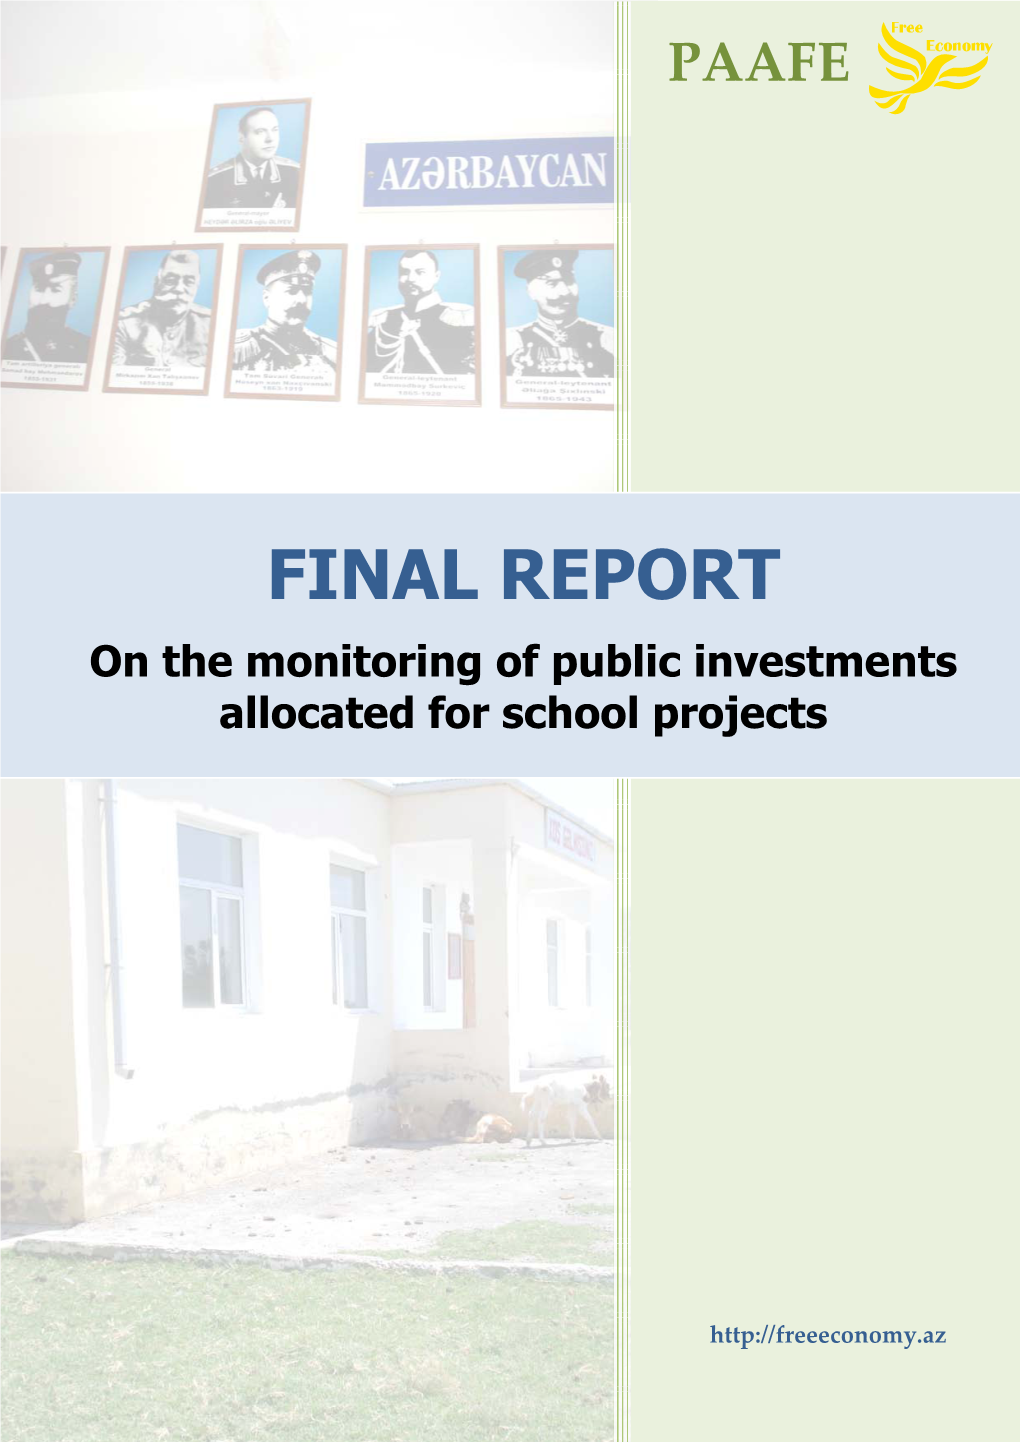 I. Funds Allocated for the Construction and Renovation of Schools